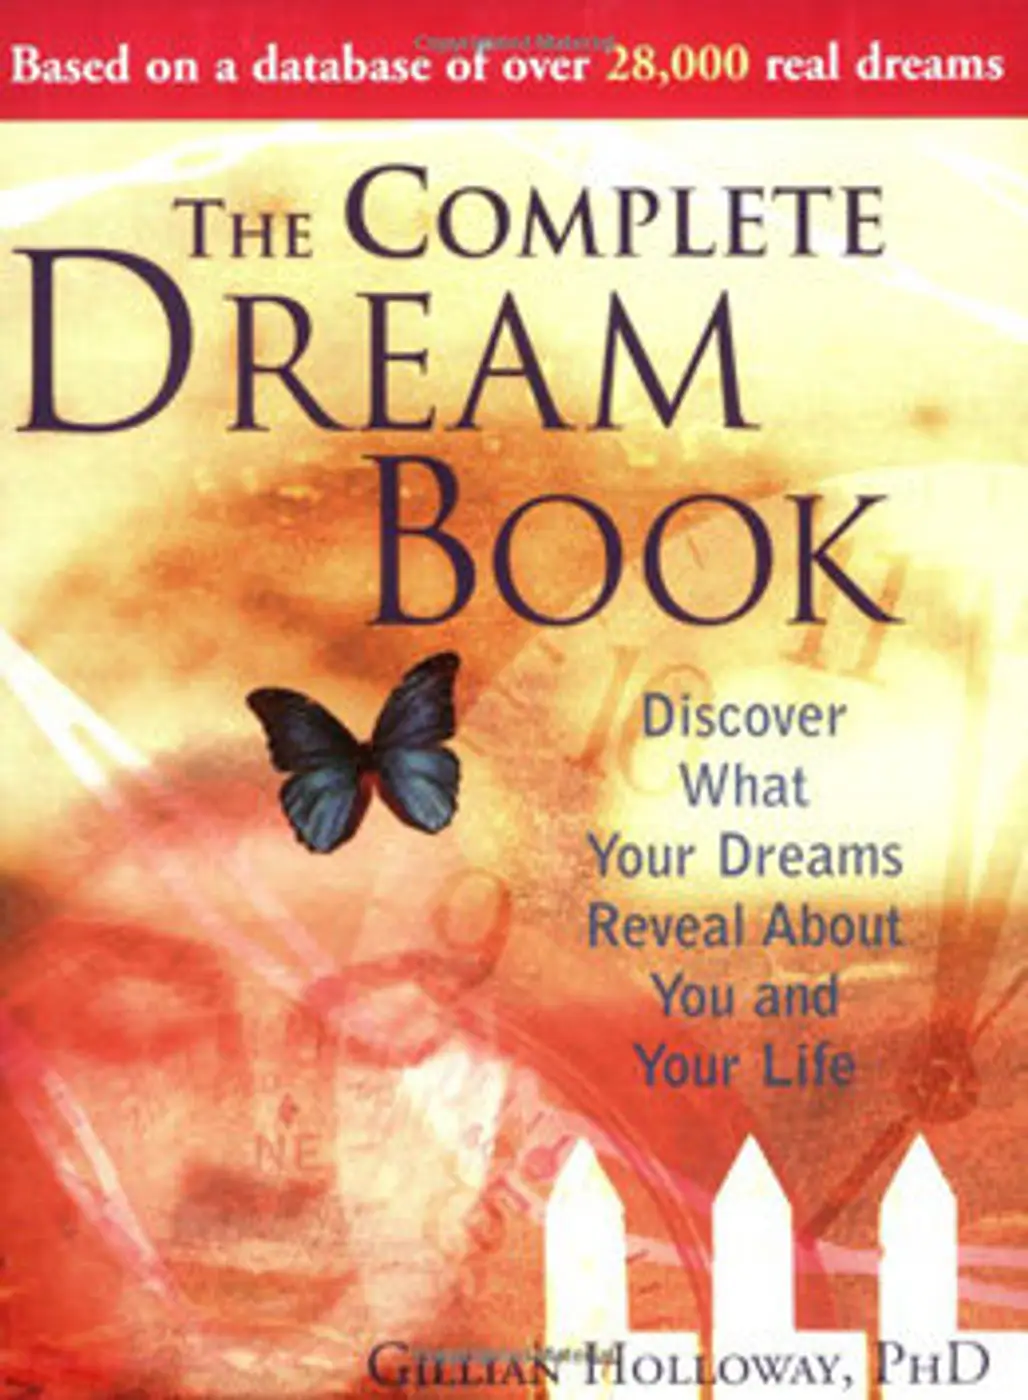 The Complete Dream Book by Gillian Holloway